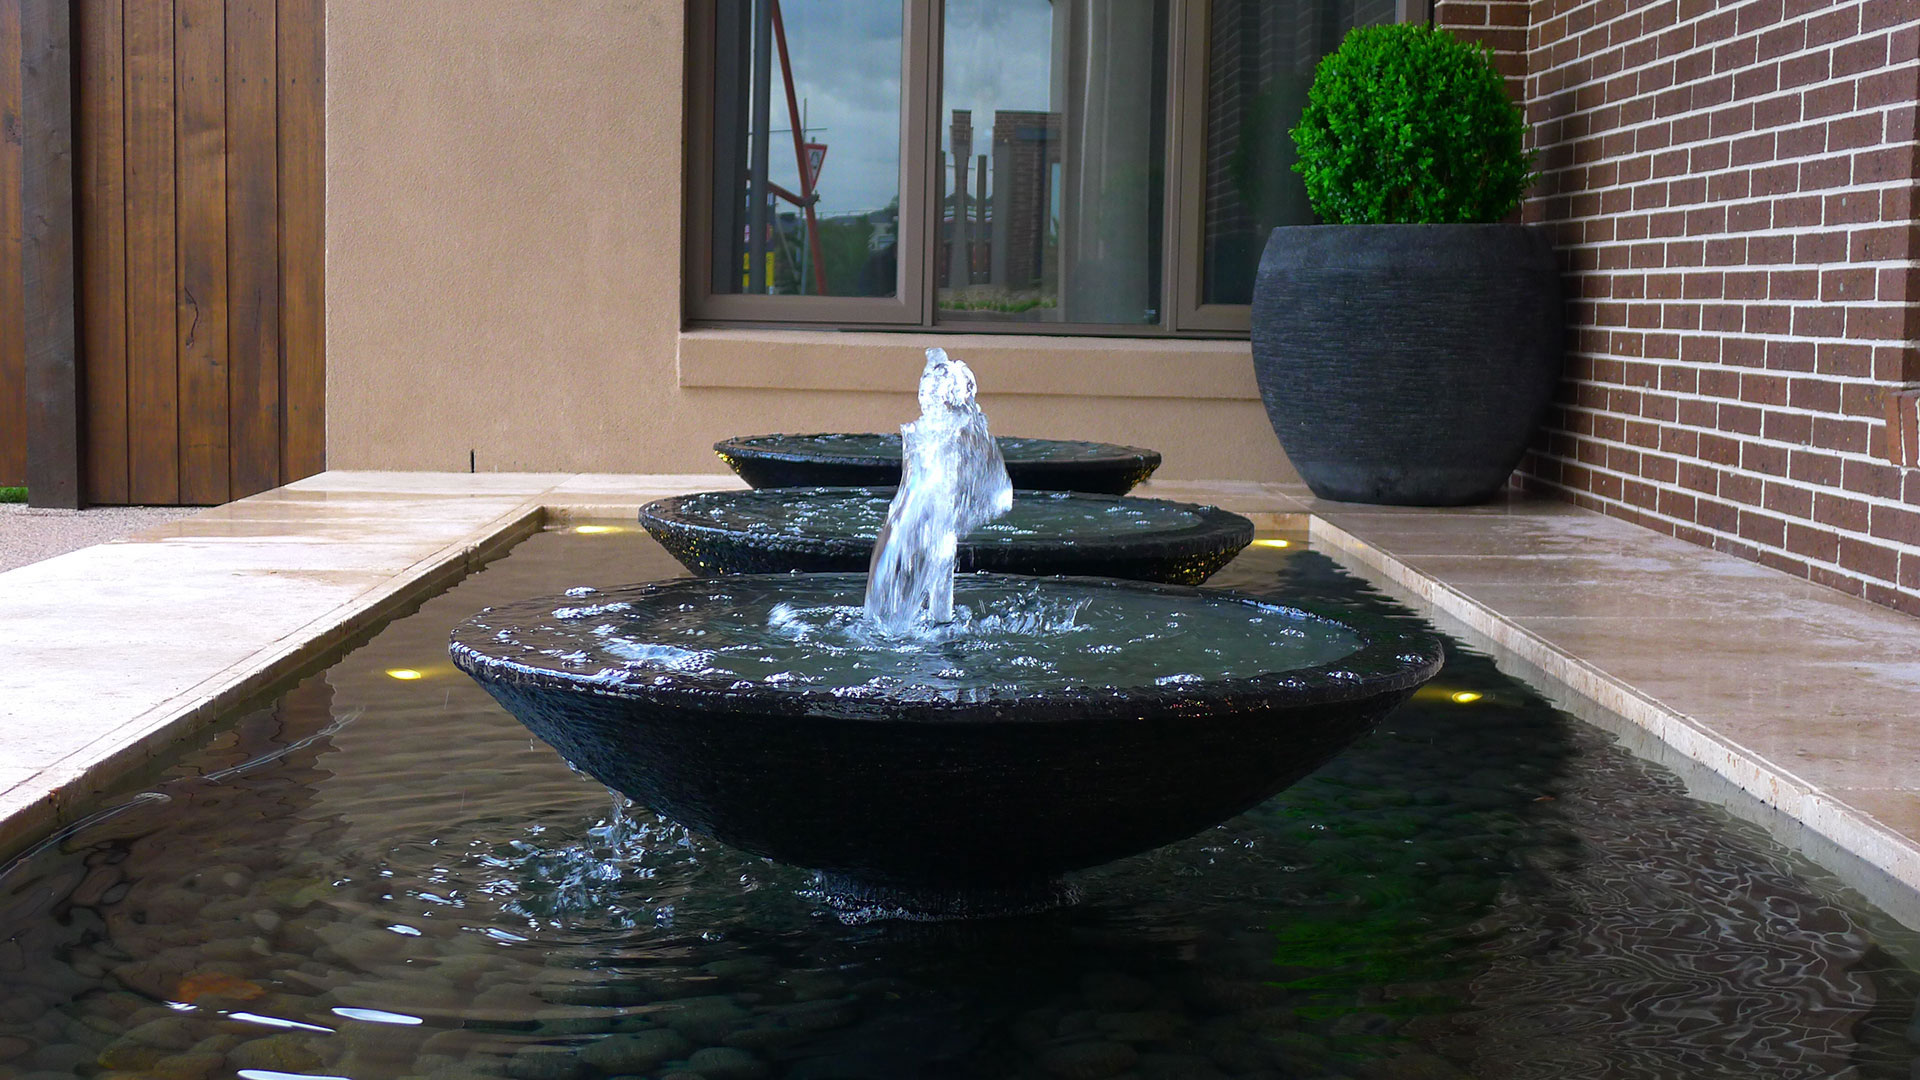 Pump maintenance for your water feature/fountain